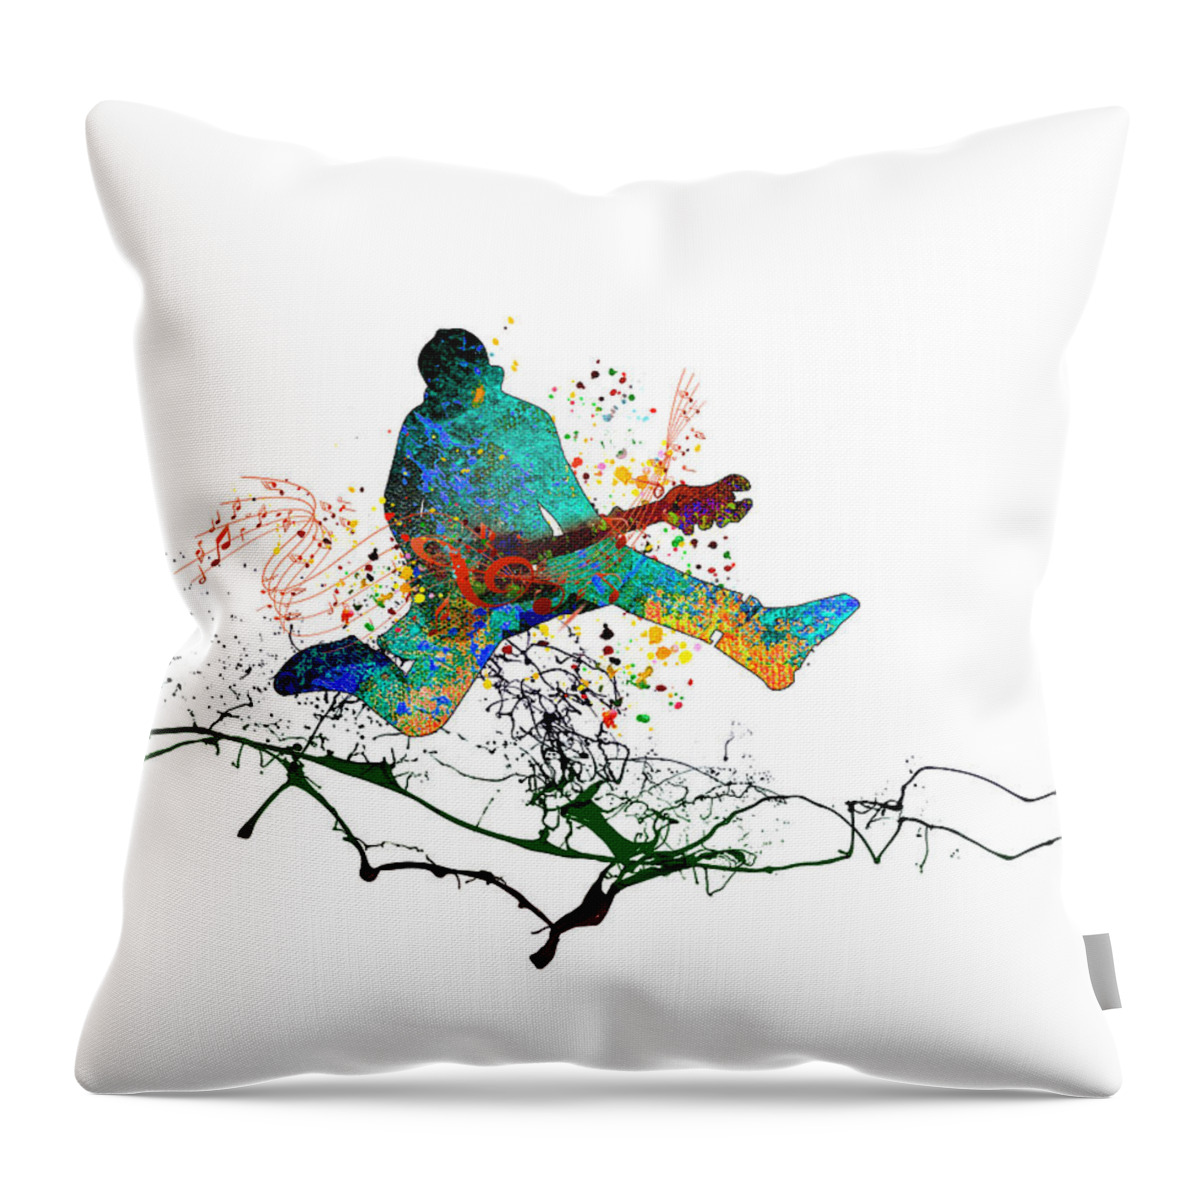 Watercolour Throw Pillow featuring the mixed media Rock Passion 01 by Miki De Goodaboom